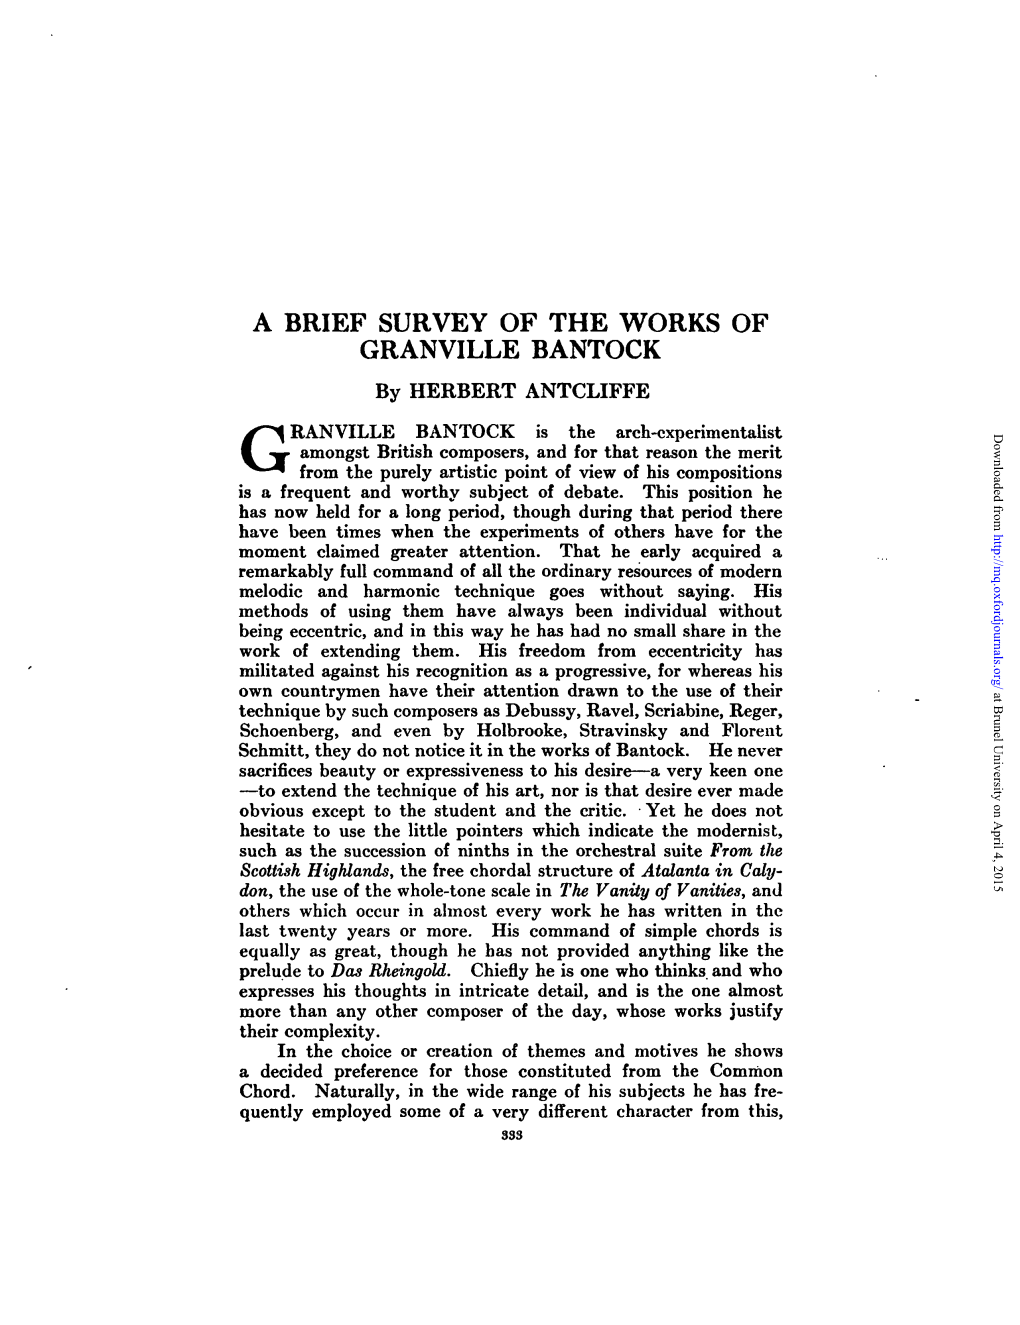 A BRIEF SURVEY of the WORKS of GRANVILLE BANTOCK by HERBERT ANTCLIFFE